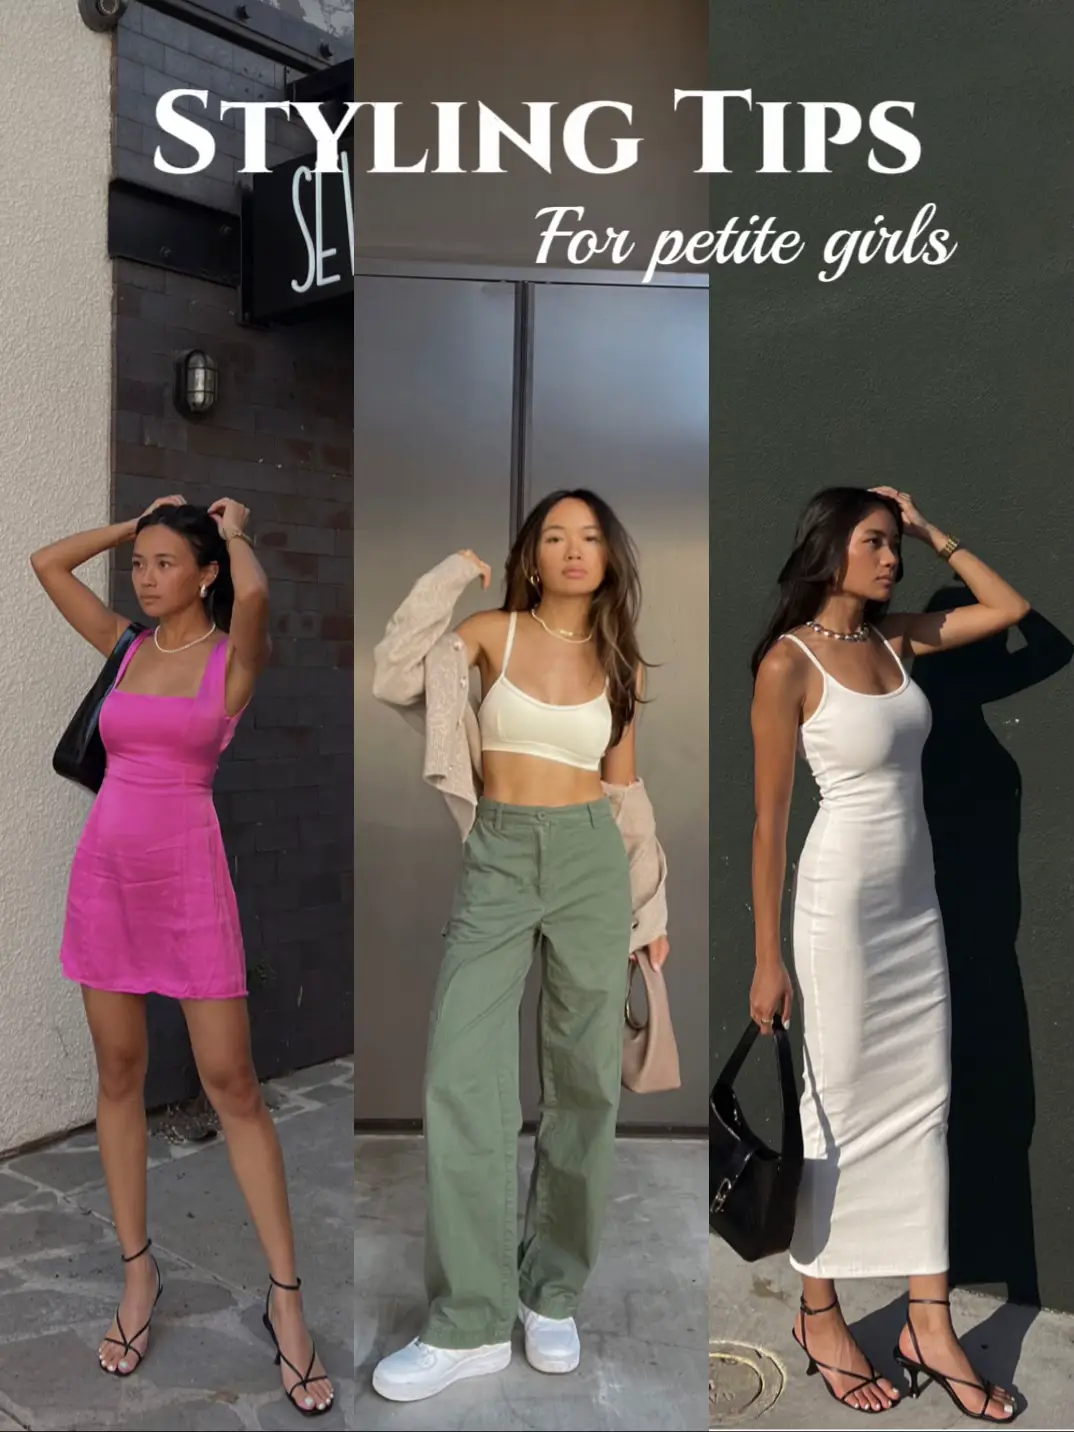 Styling Tips for Petite Girls, Gallery posted by Pattipan